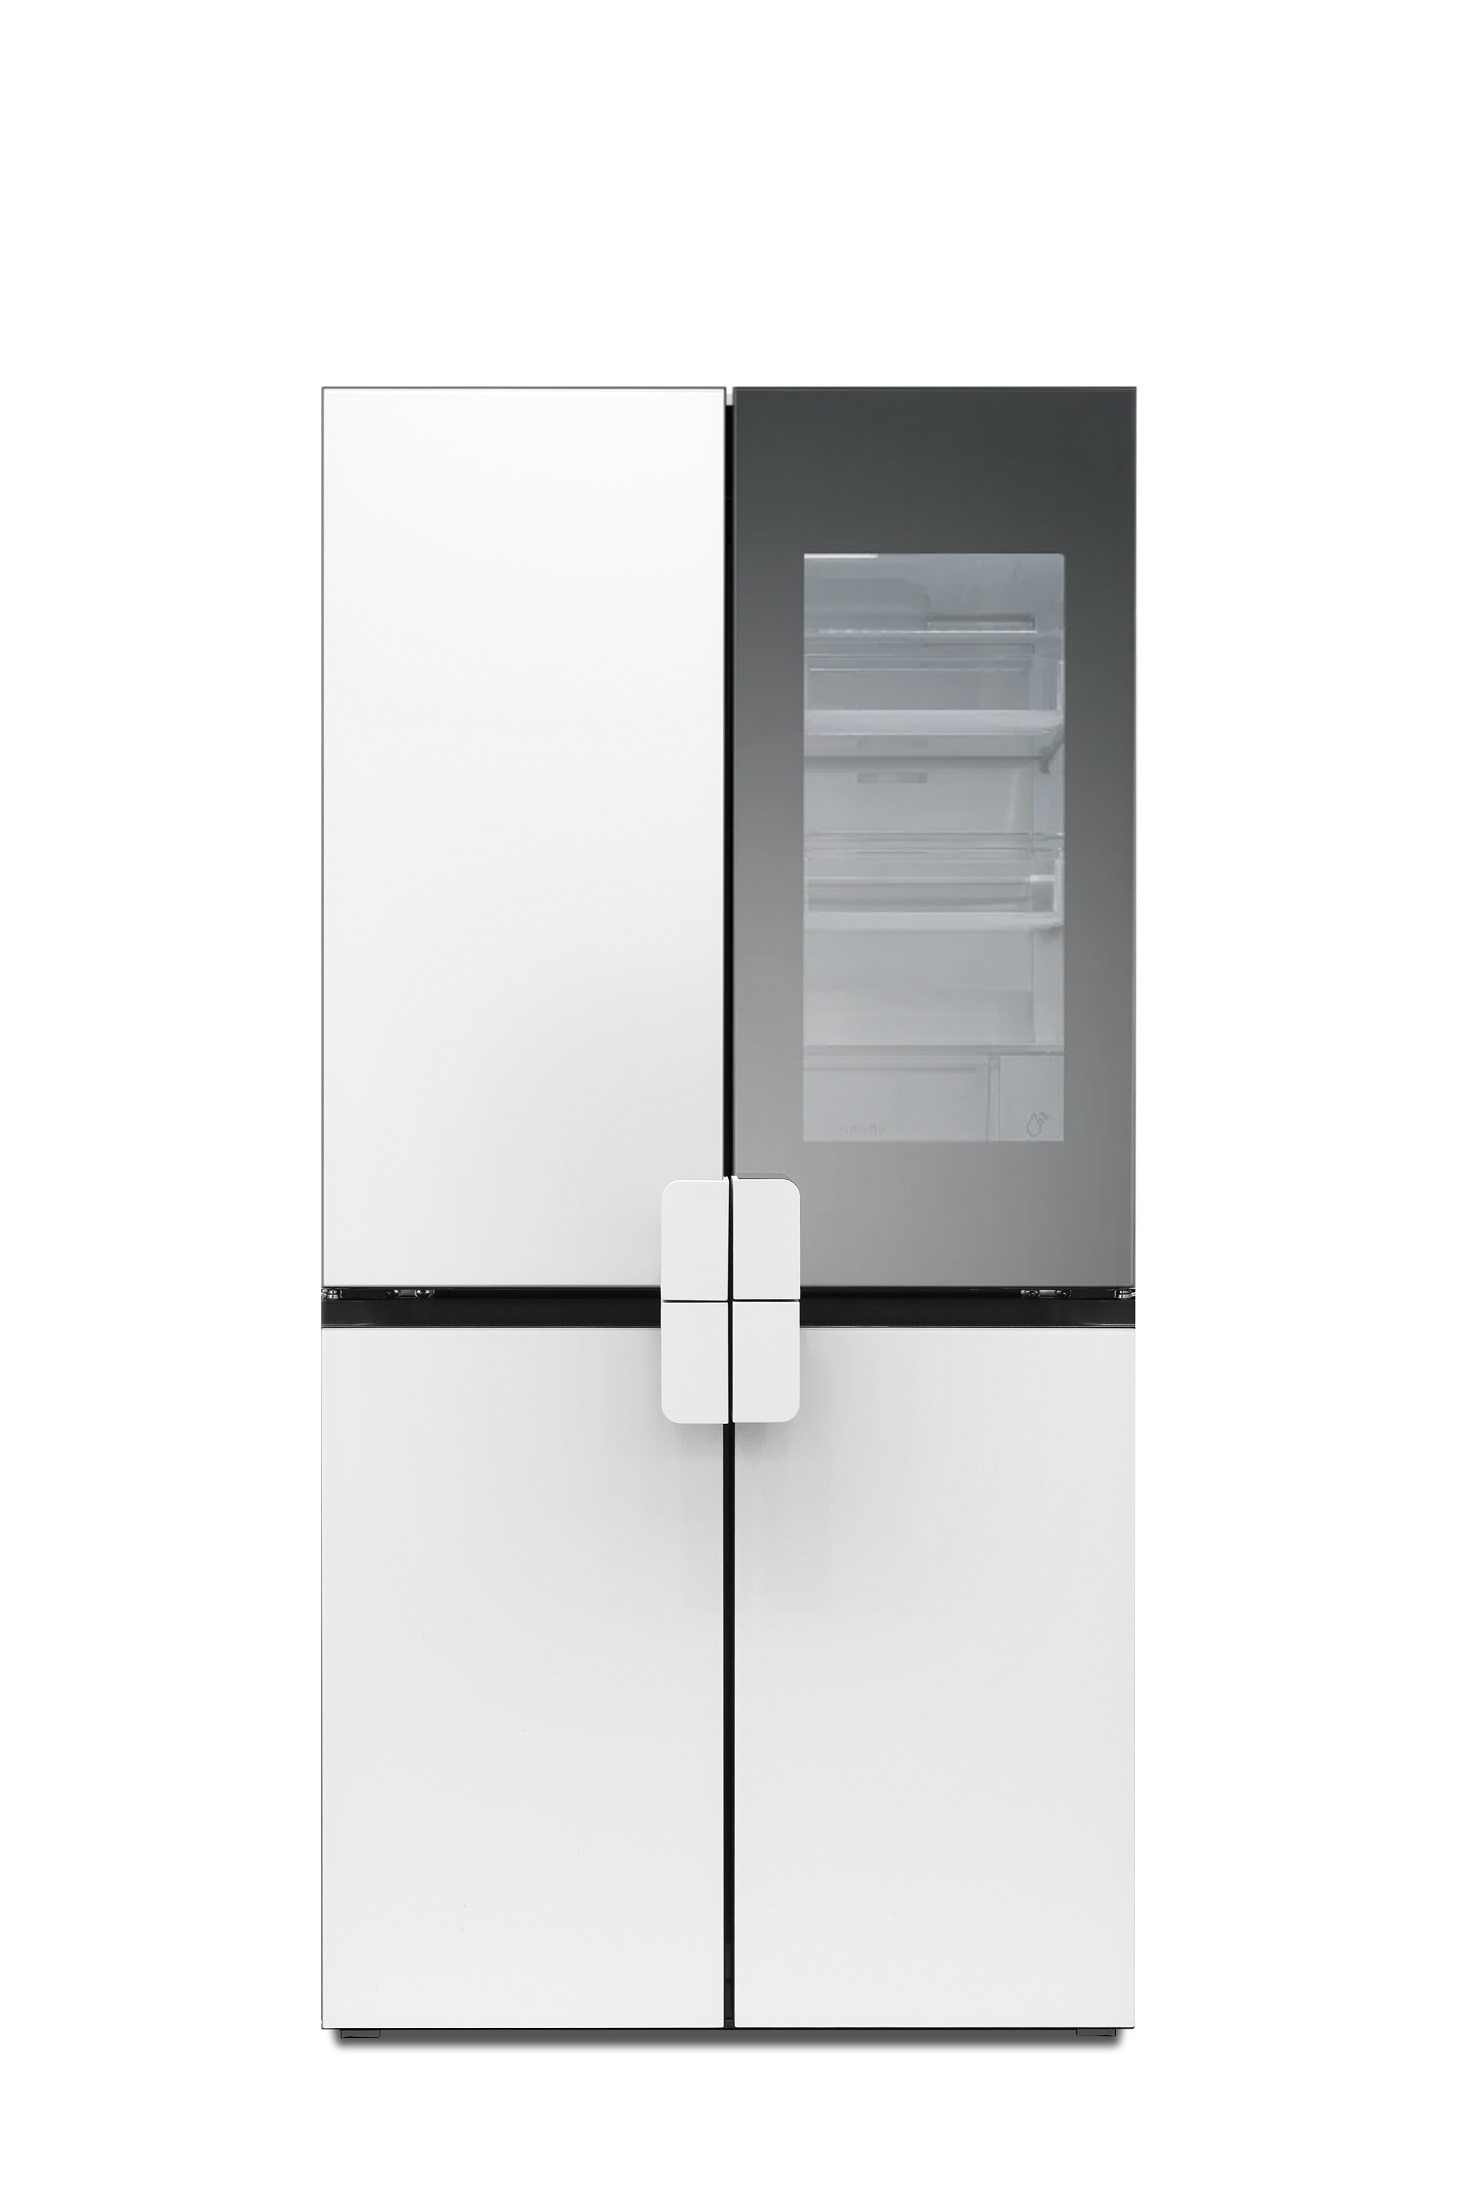 LG InstaView refrigerator with Universal UP Kit for enhanced usability and accessibility